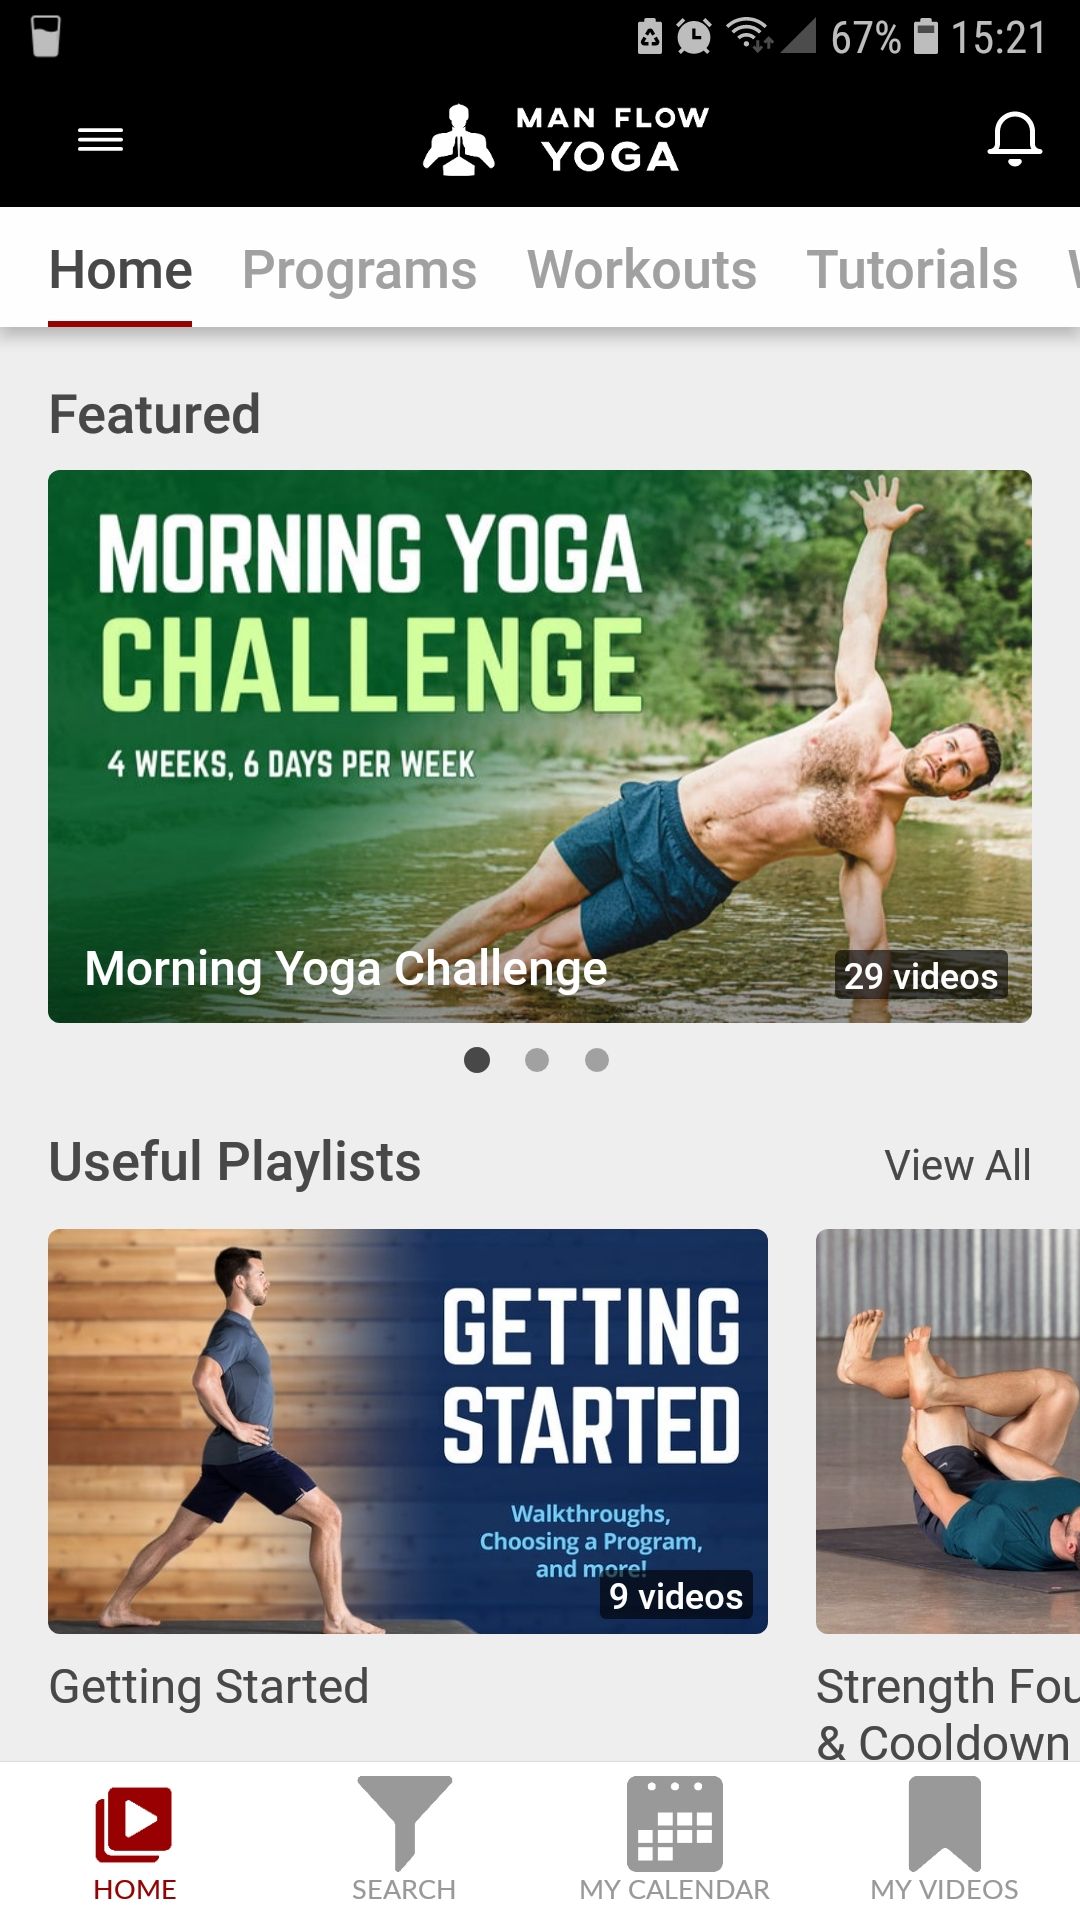 Man Flow Yoga mobile app home page